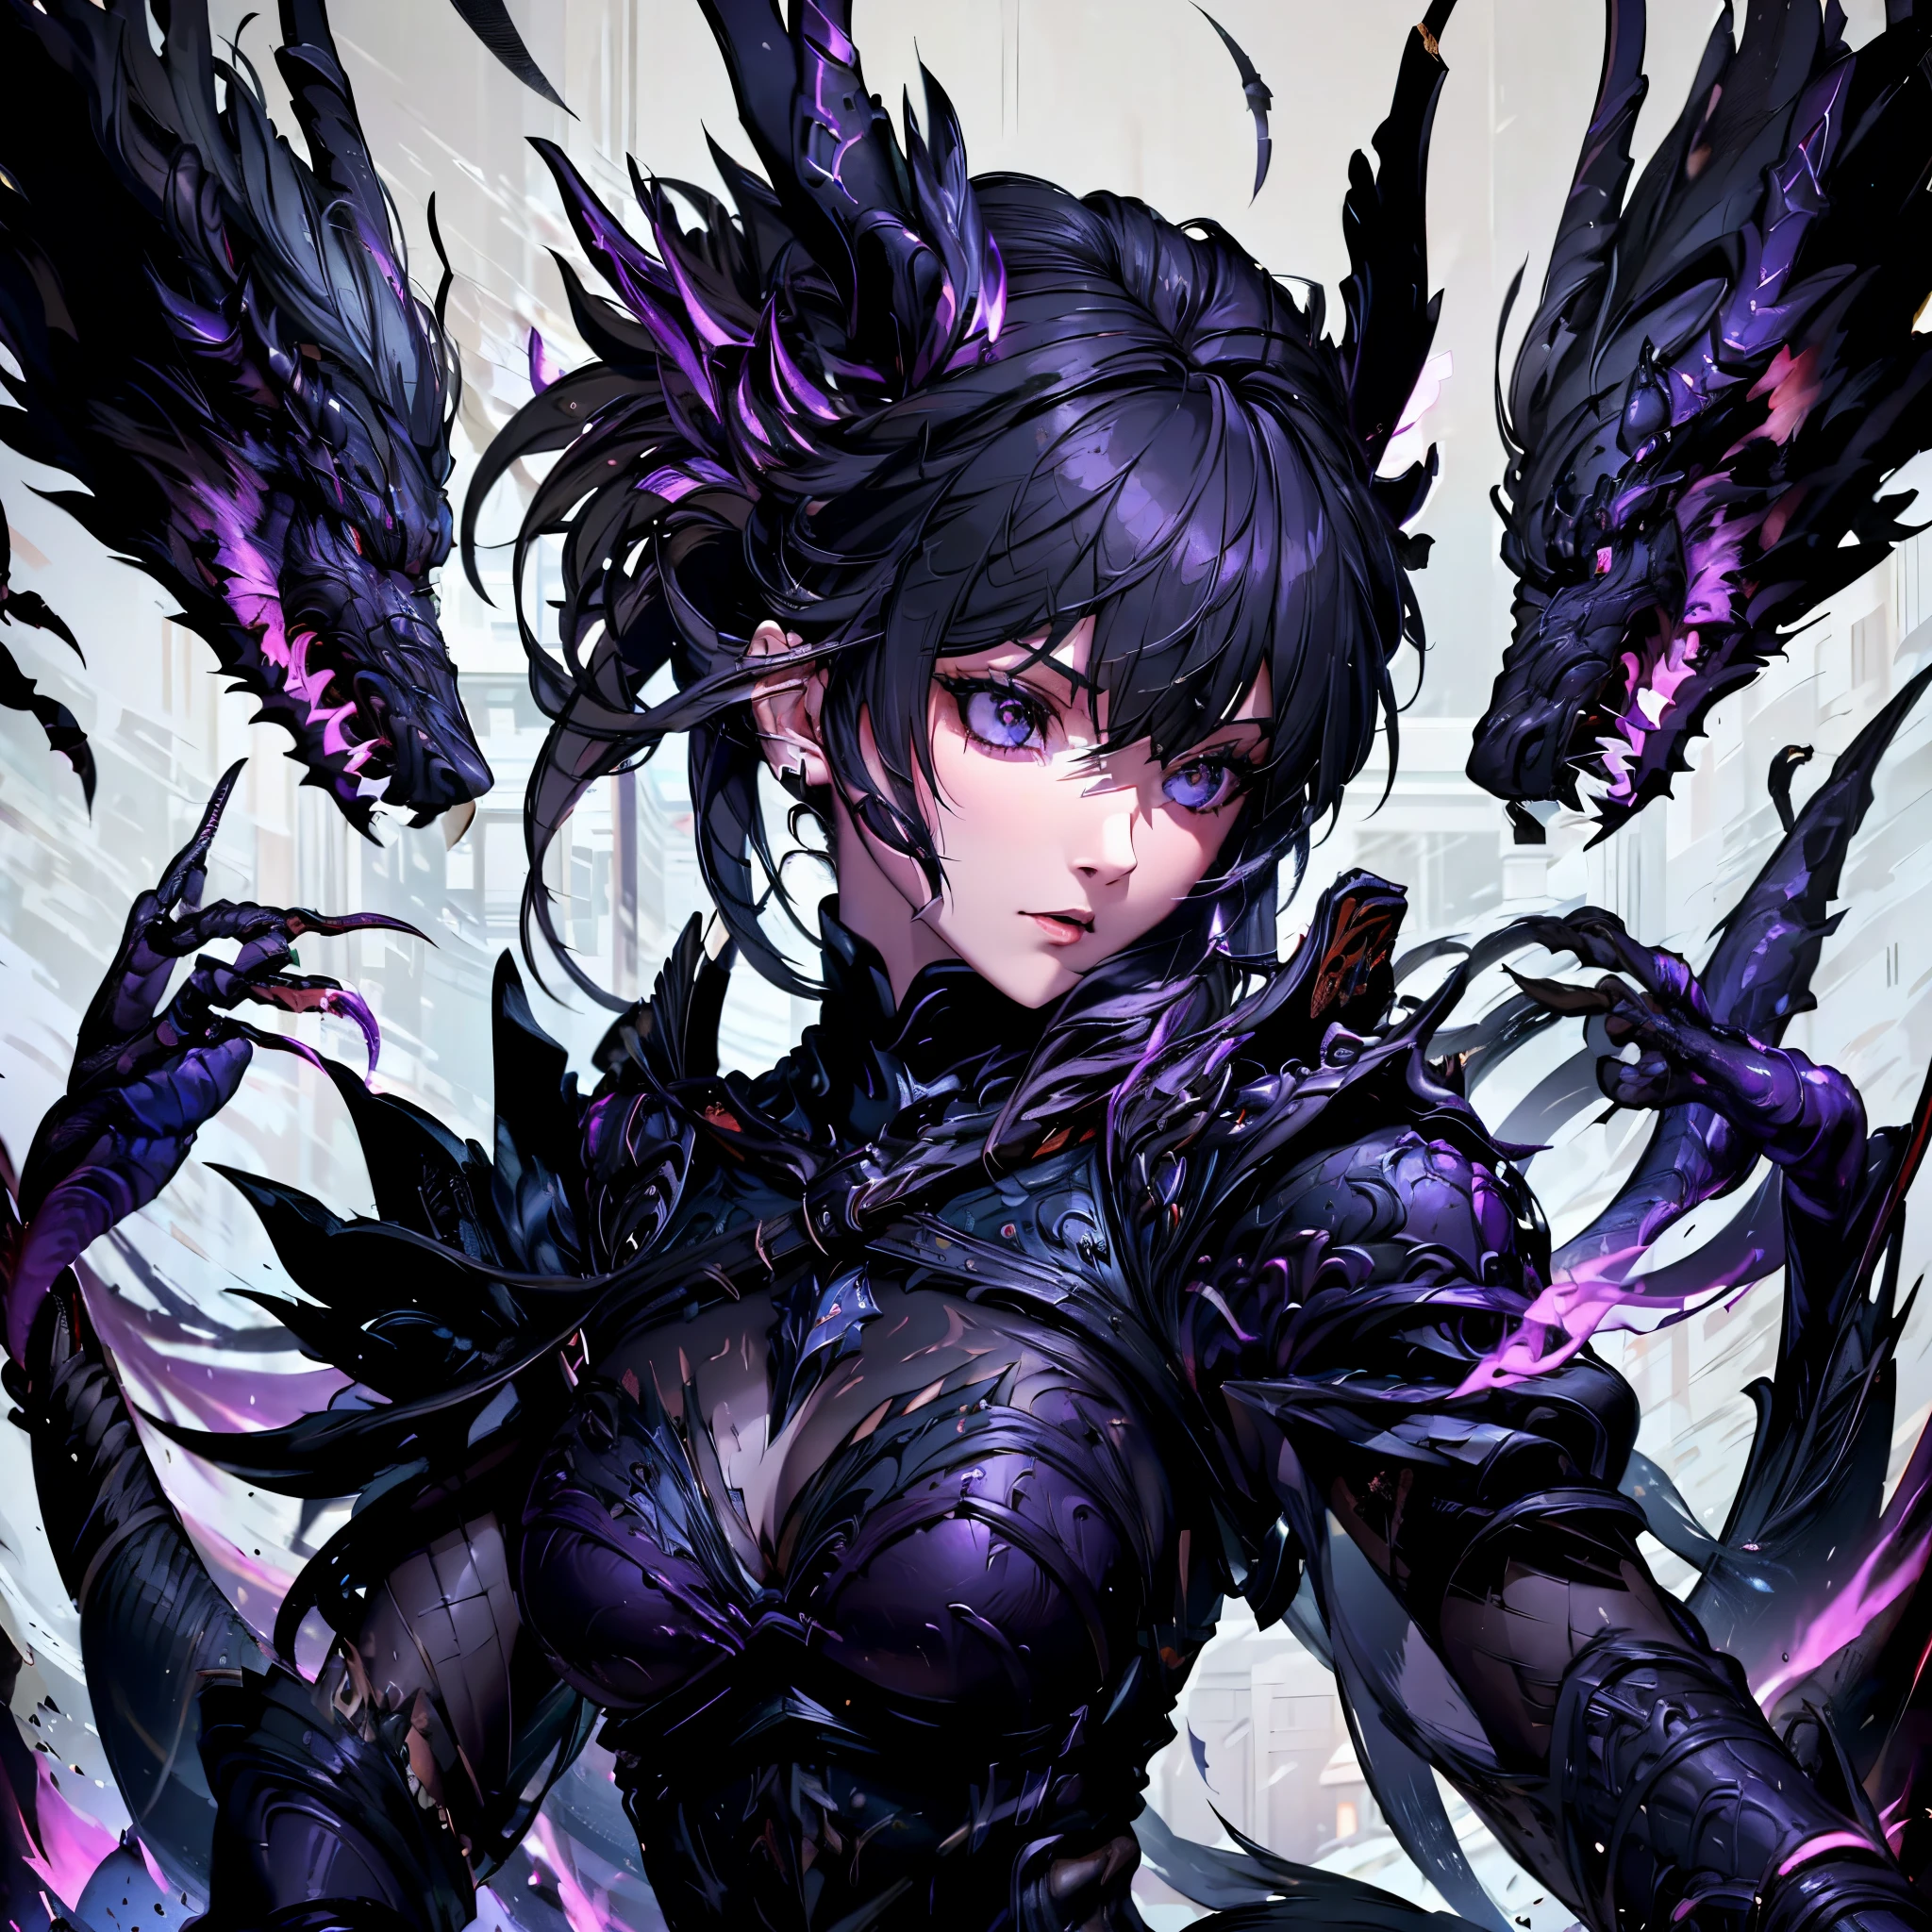 Girl in black armor. she is a sharp ornament. Two black dragons attack her from behind.. Sharp Hair Ornament. torn feather. sharp claws. she is dyed in purple flame.